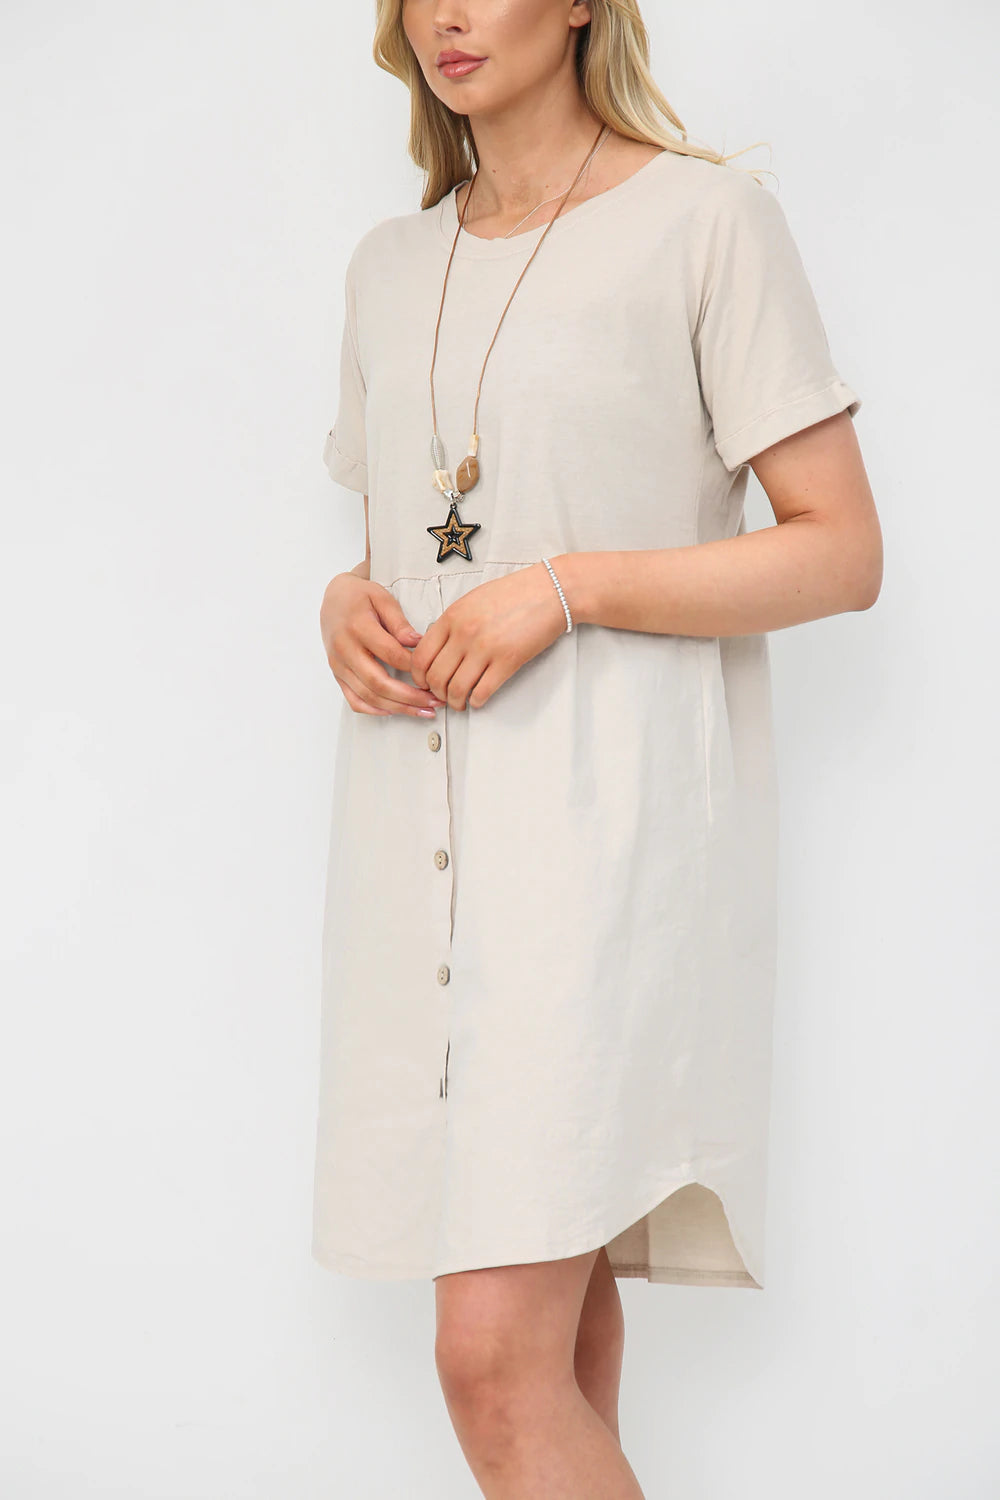 Cotton Dress With Necklace